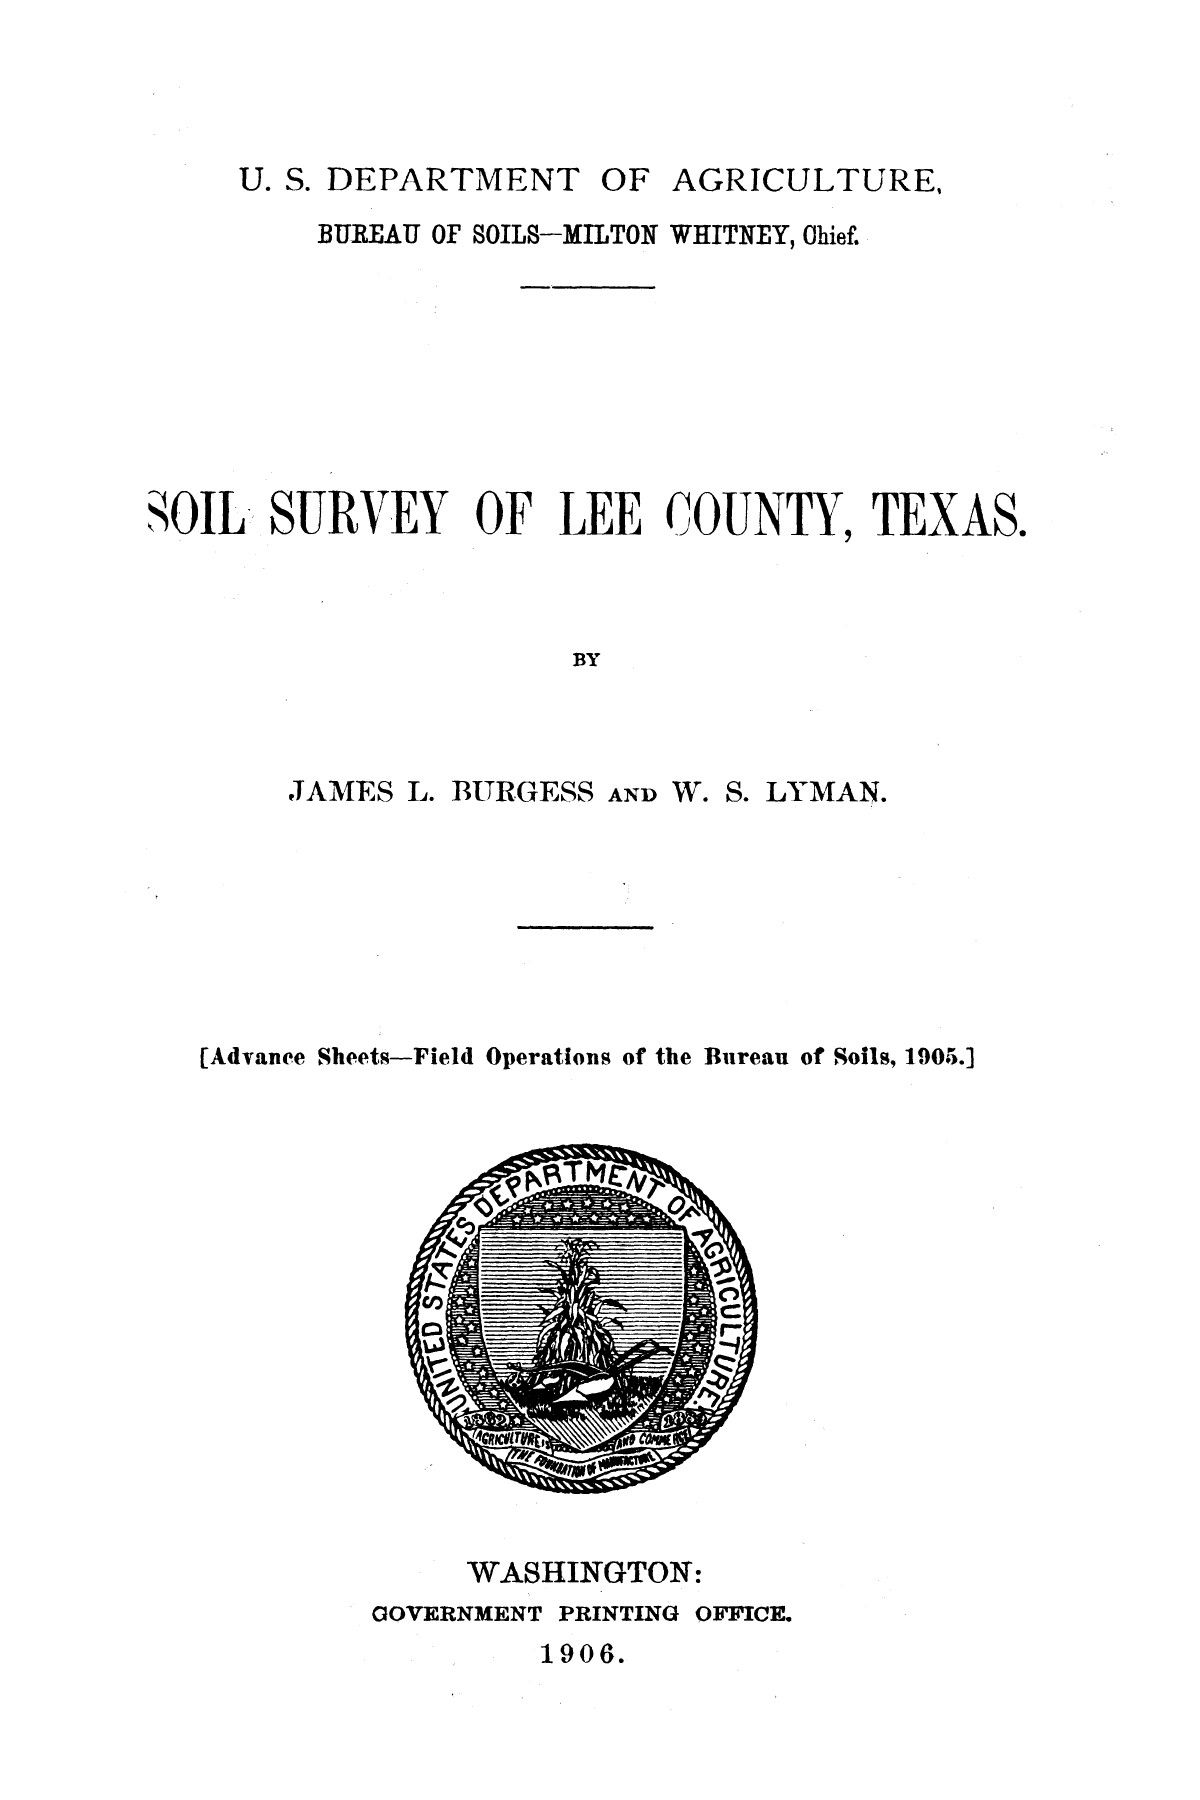 Soil survey of Lee County, Texas
                                                
                                                    [Sequence #]: 1 of 27
                                                